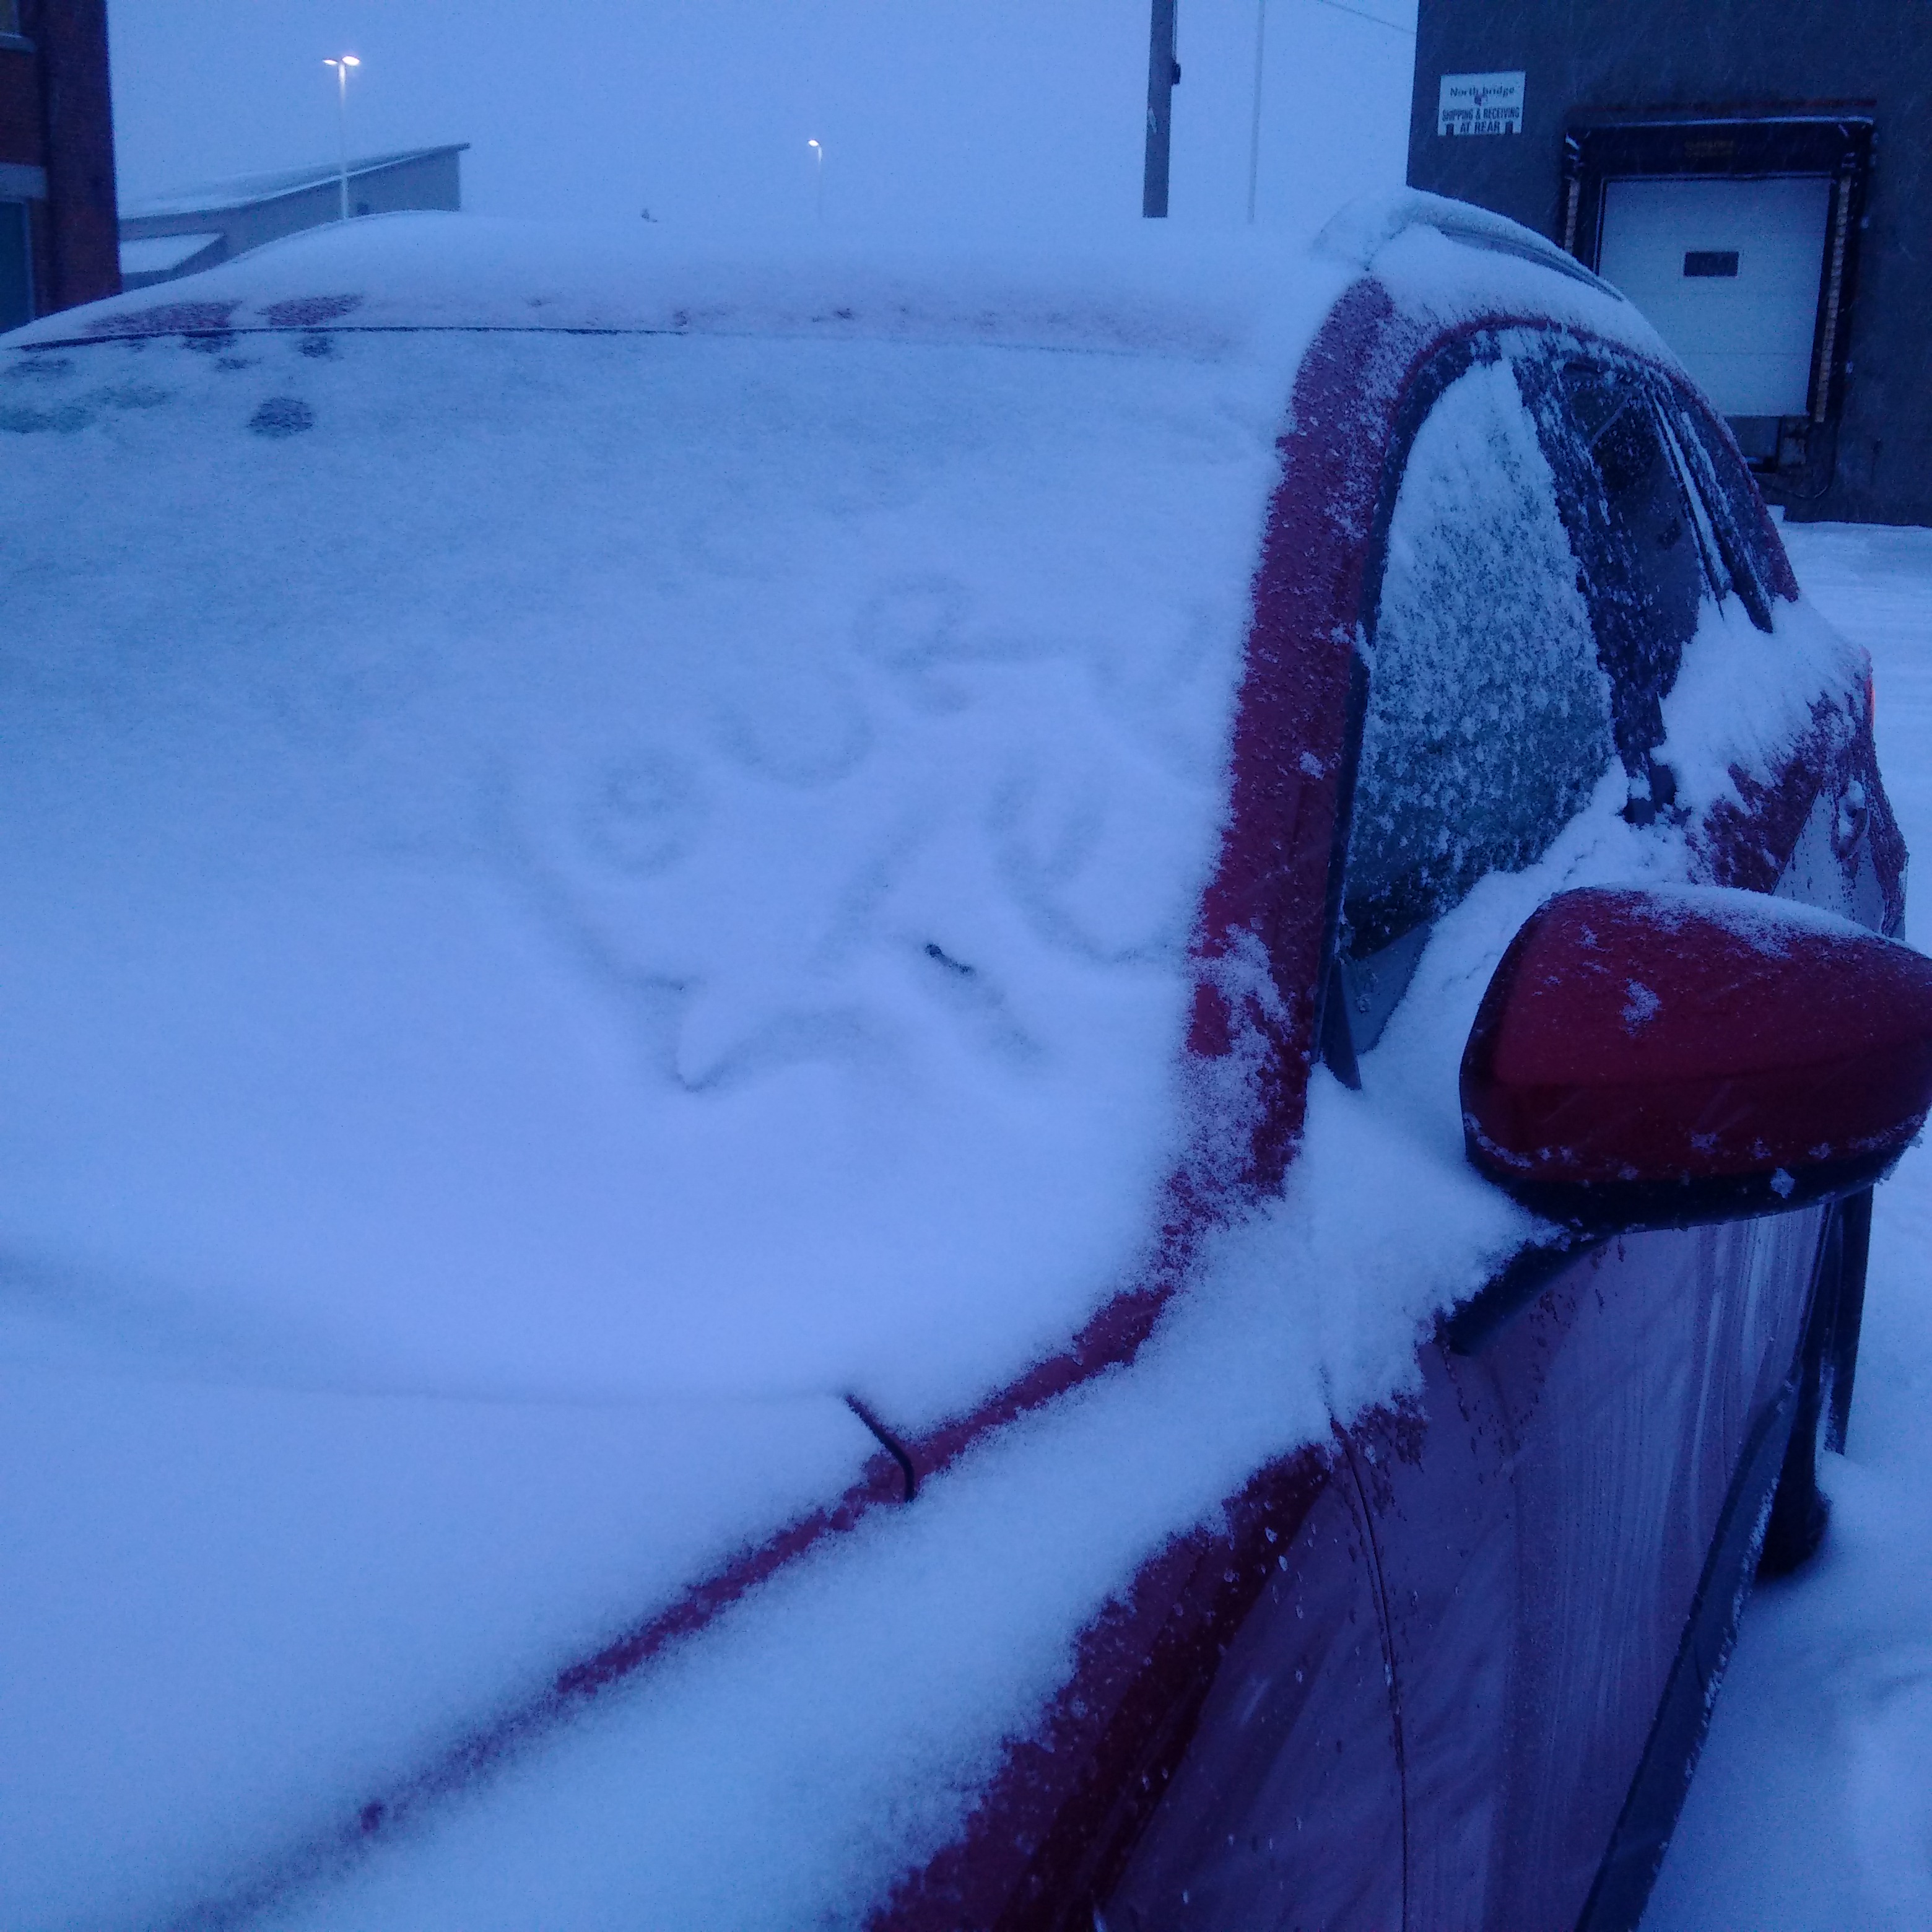 A red vehicle with snow on its windshield